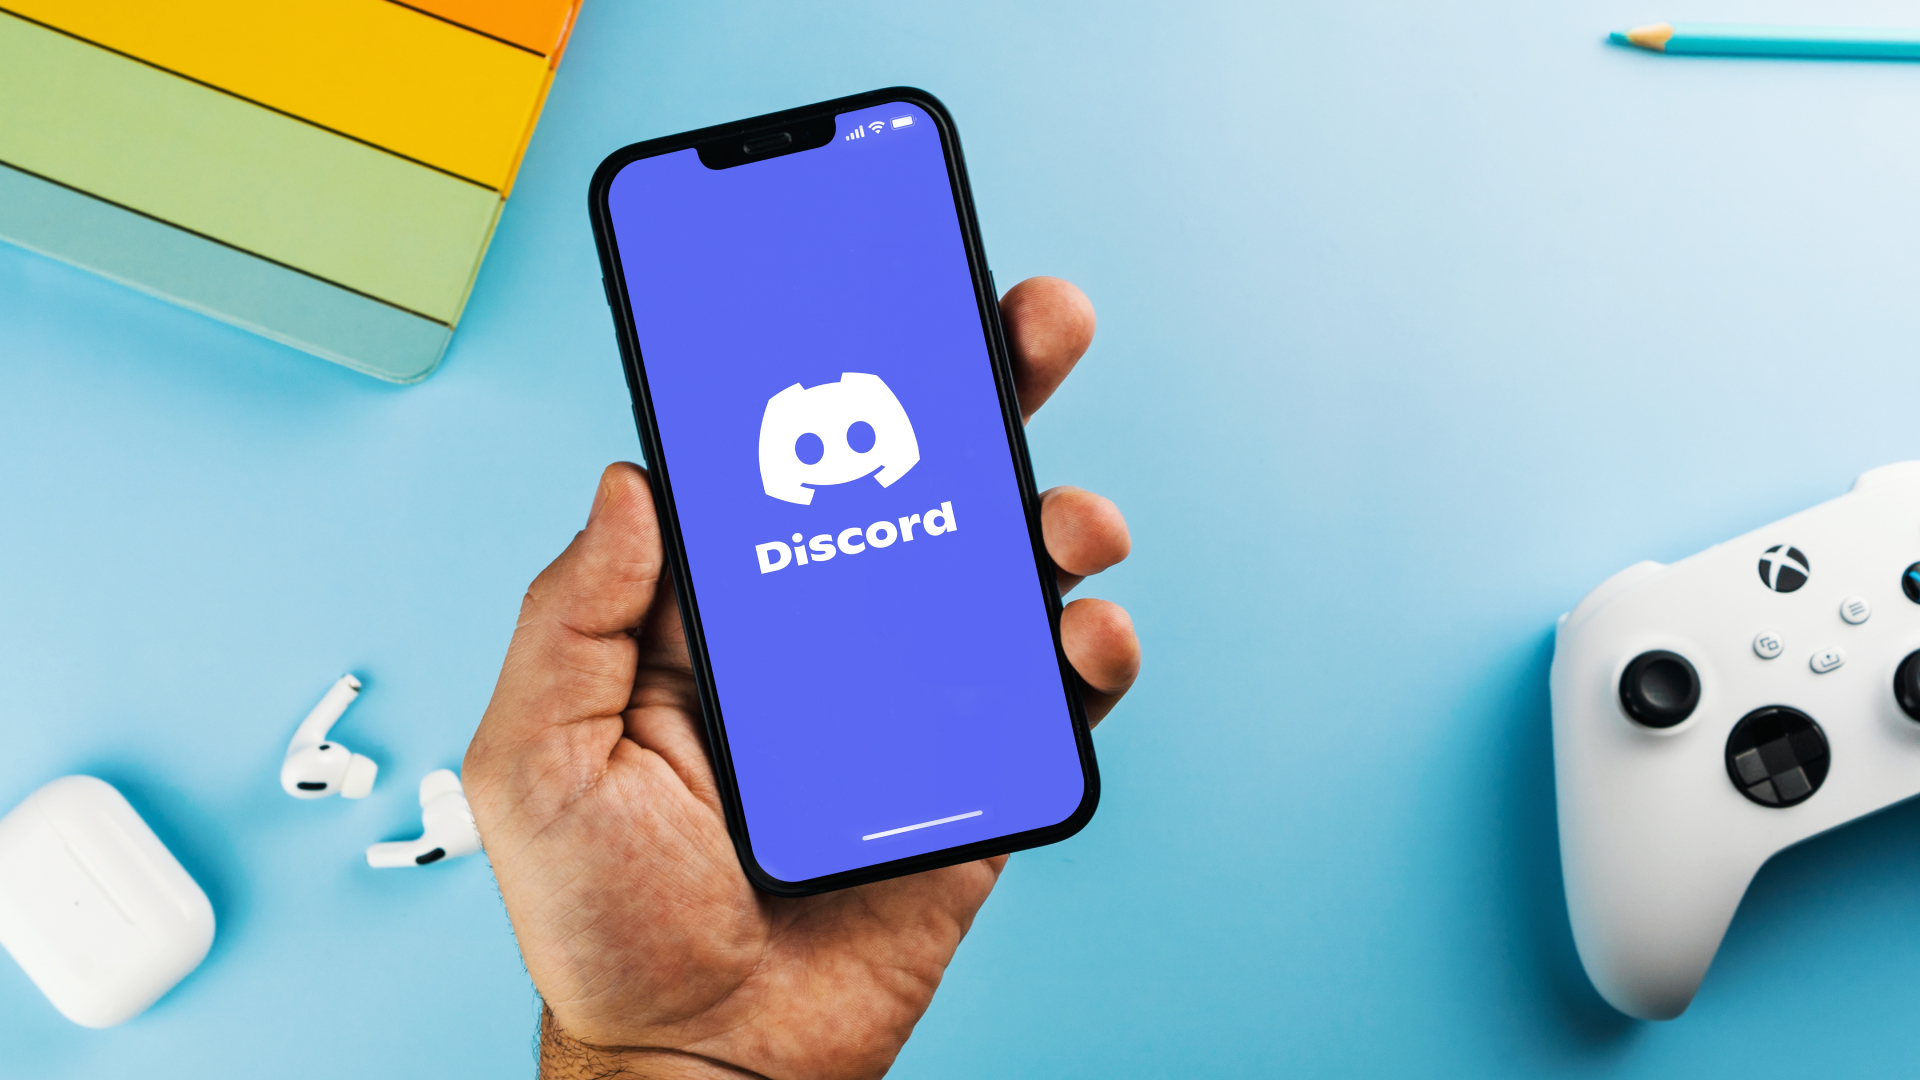 Discord logo on the phone next to the Xbox console